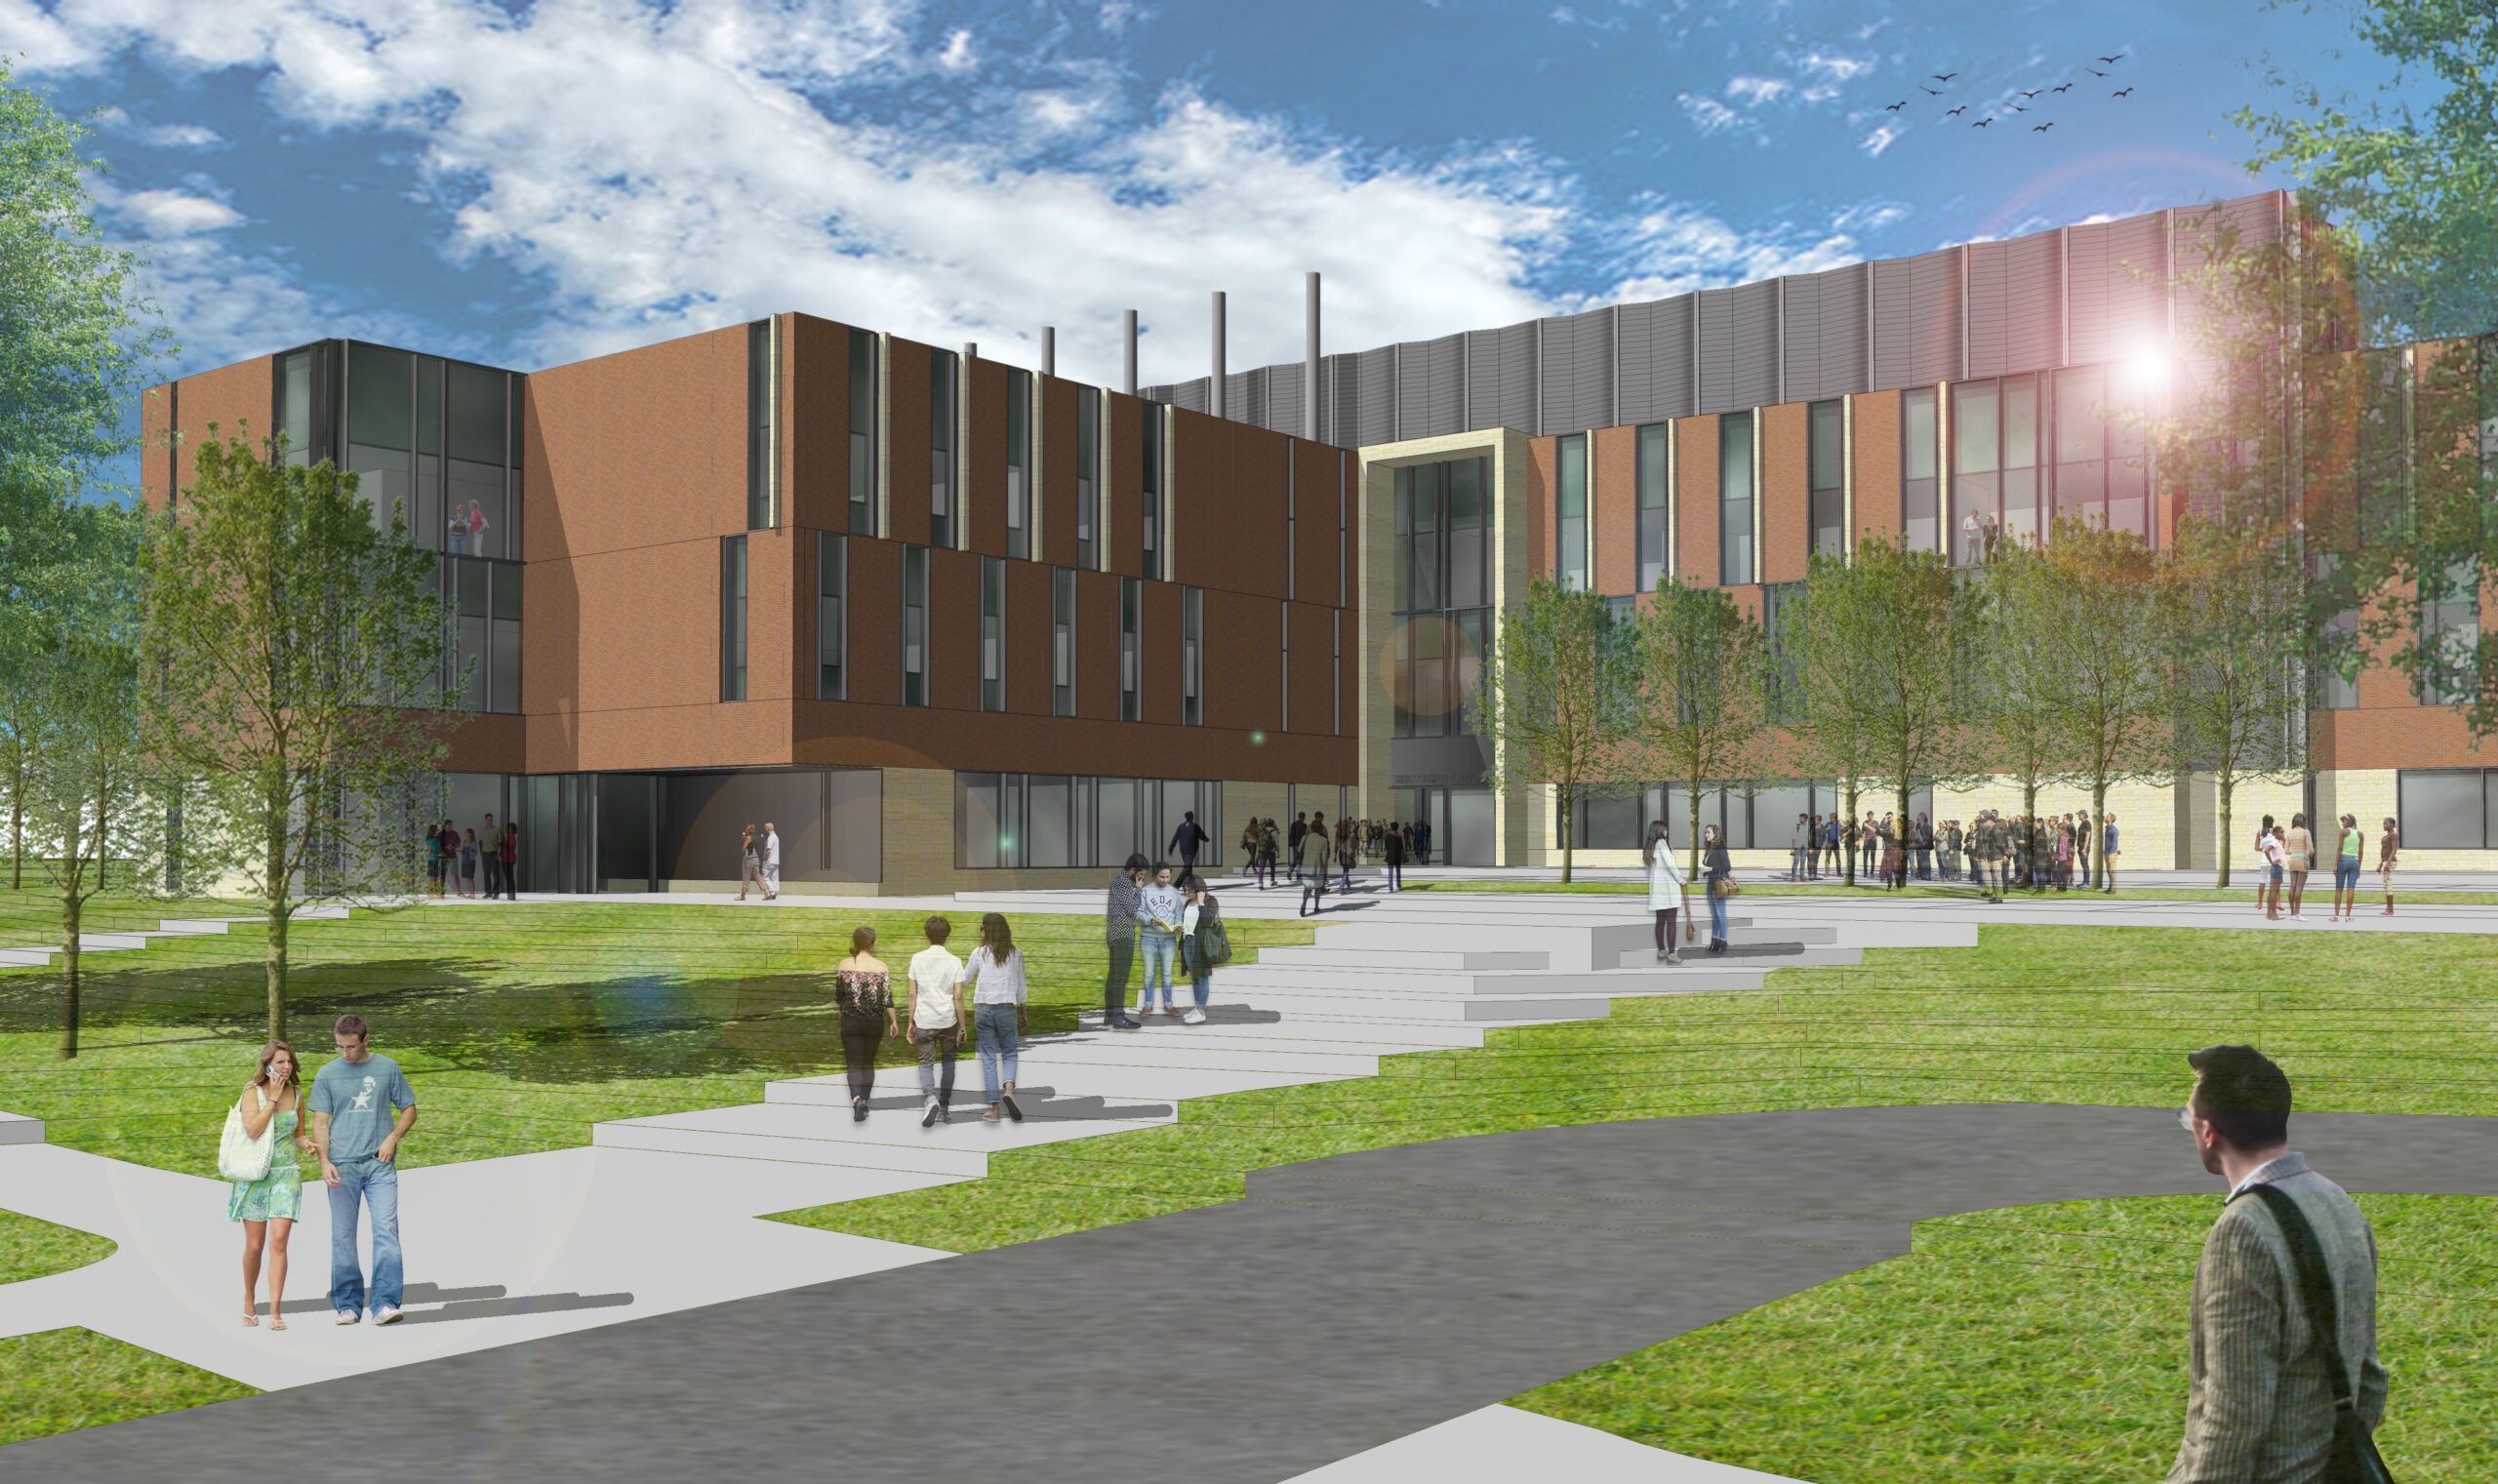 UW-River Falls expected to break ground on $117M STEM building approved by regents